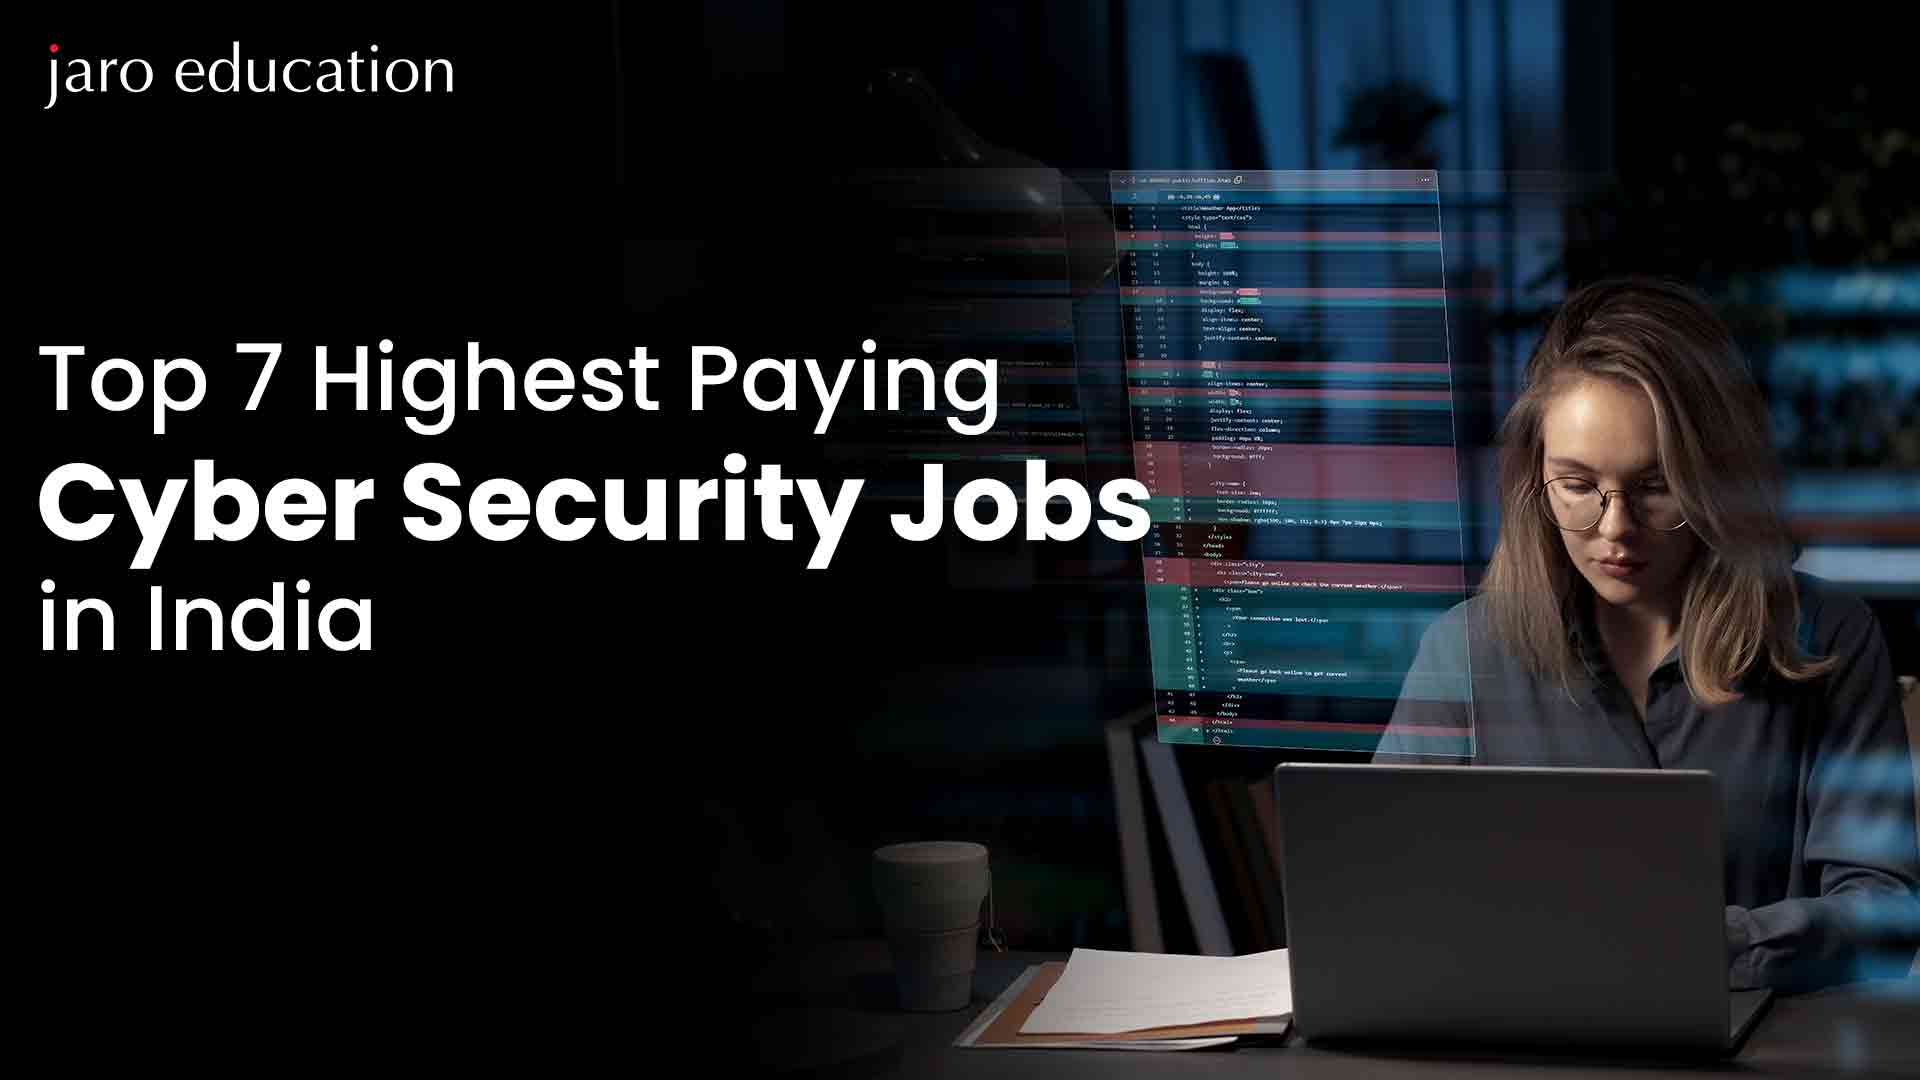 Top 7 Highest Paying Cyber Security Jobs in India